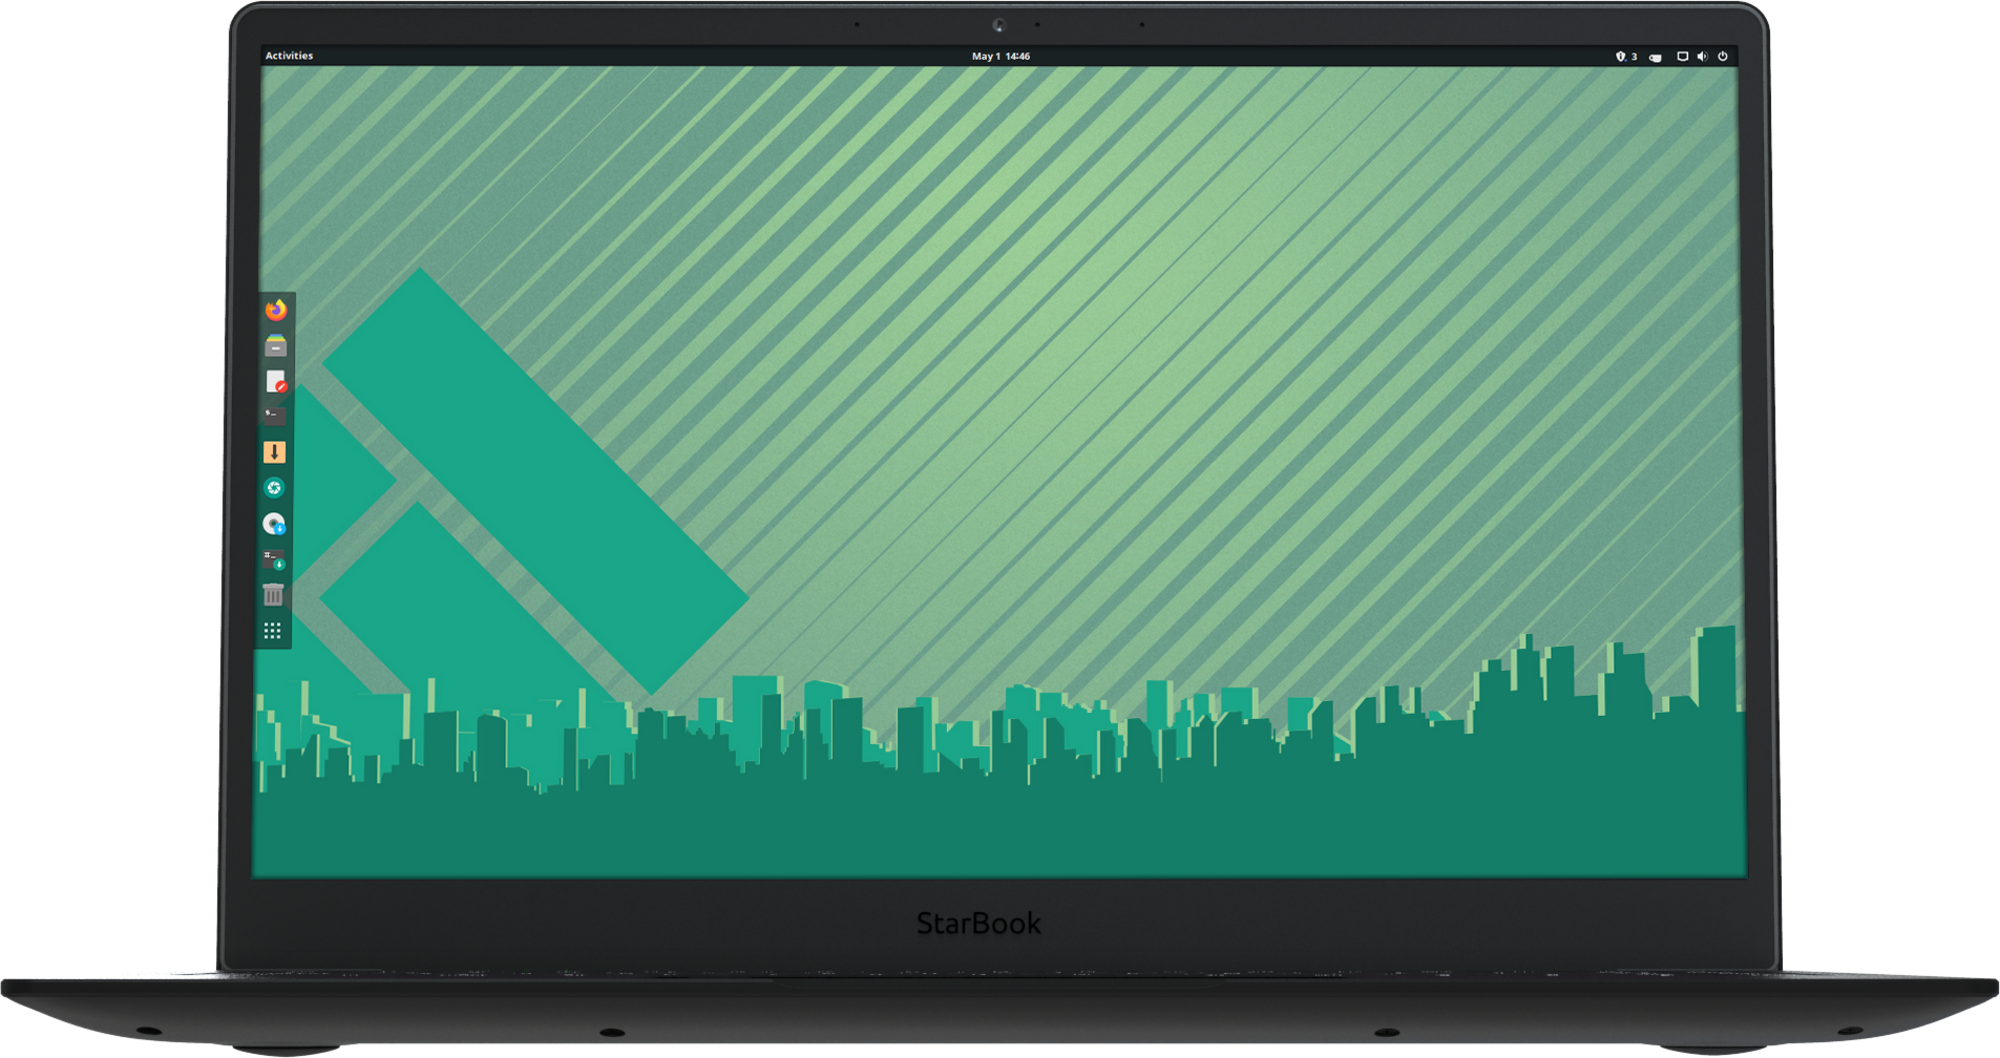 Laptop with pre-installed Manjaro Linux